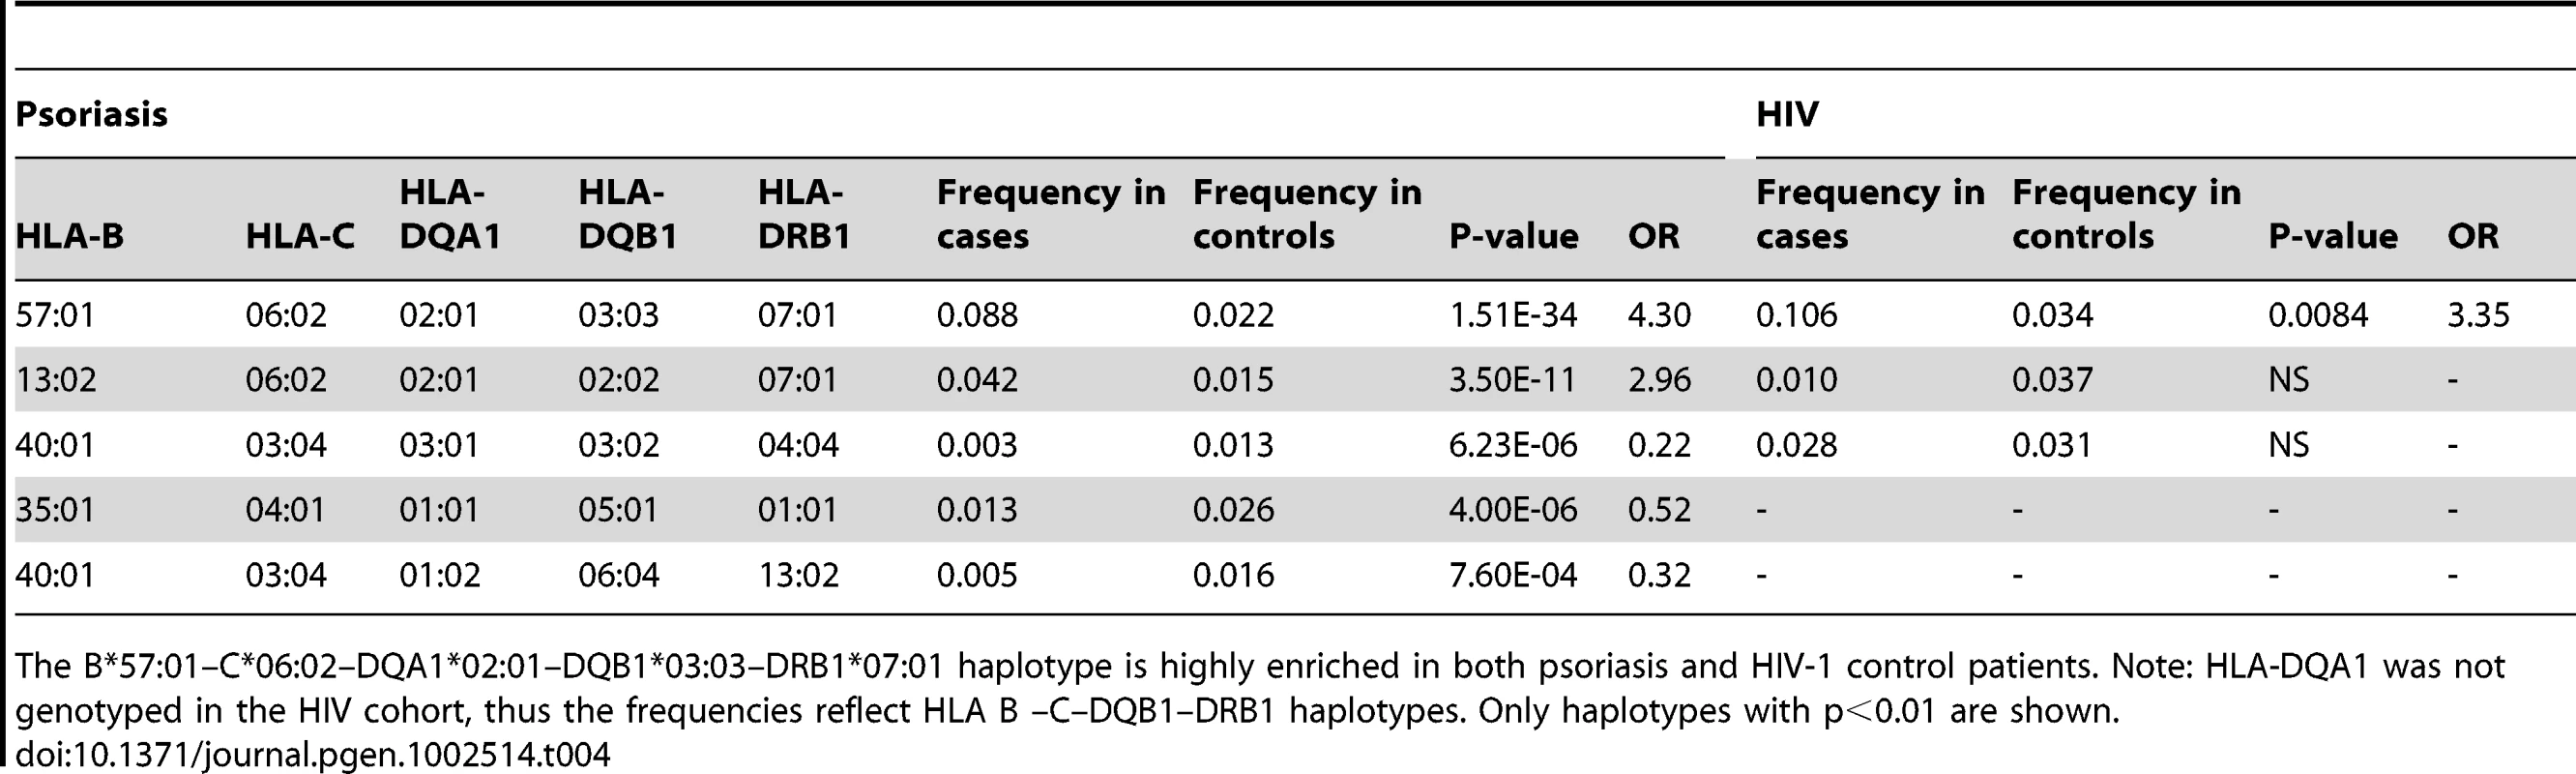 Association testing of extended class I and II HLA haplotypes with psoriasis and HIV-1 control.